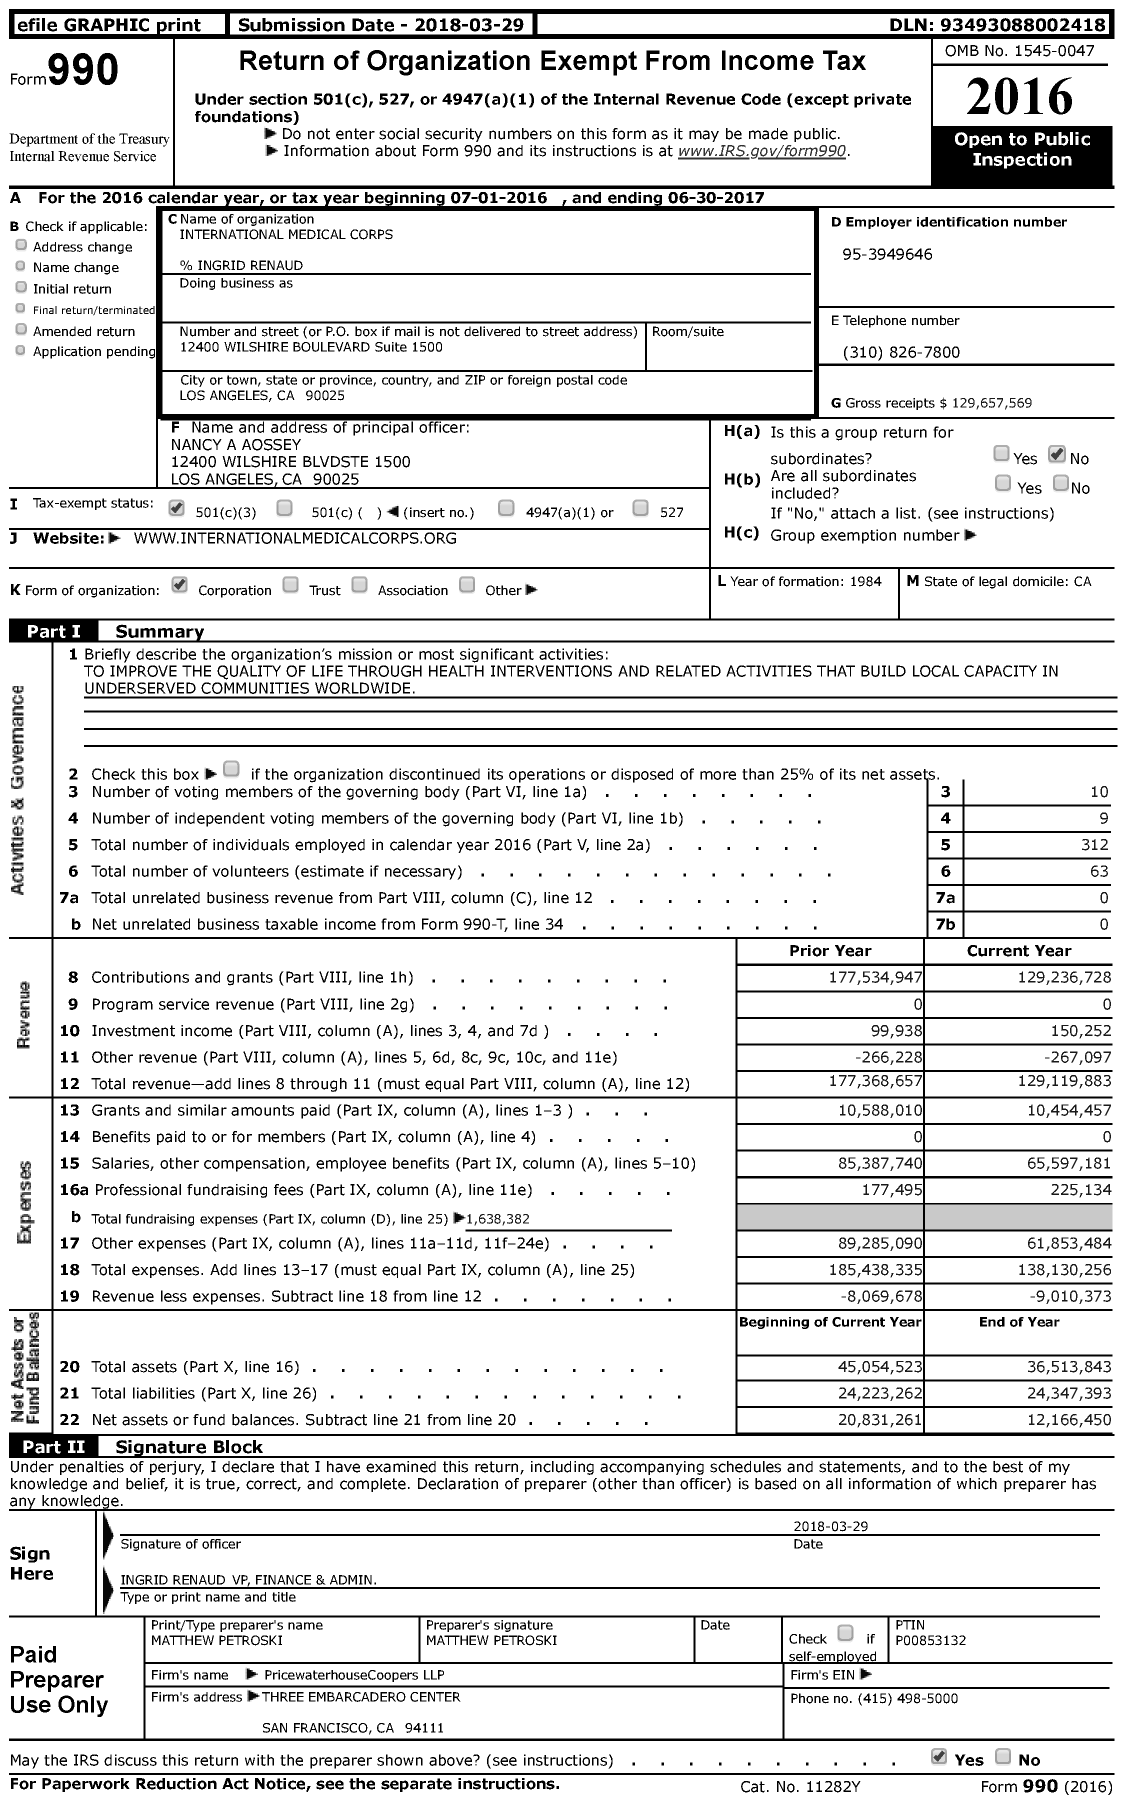 Image of first page of 2016 Form 990 for International Medical Corps (IMC)